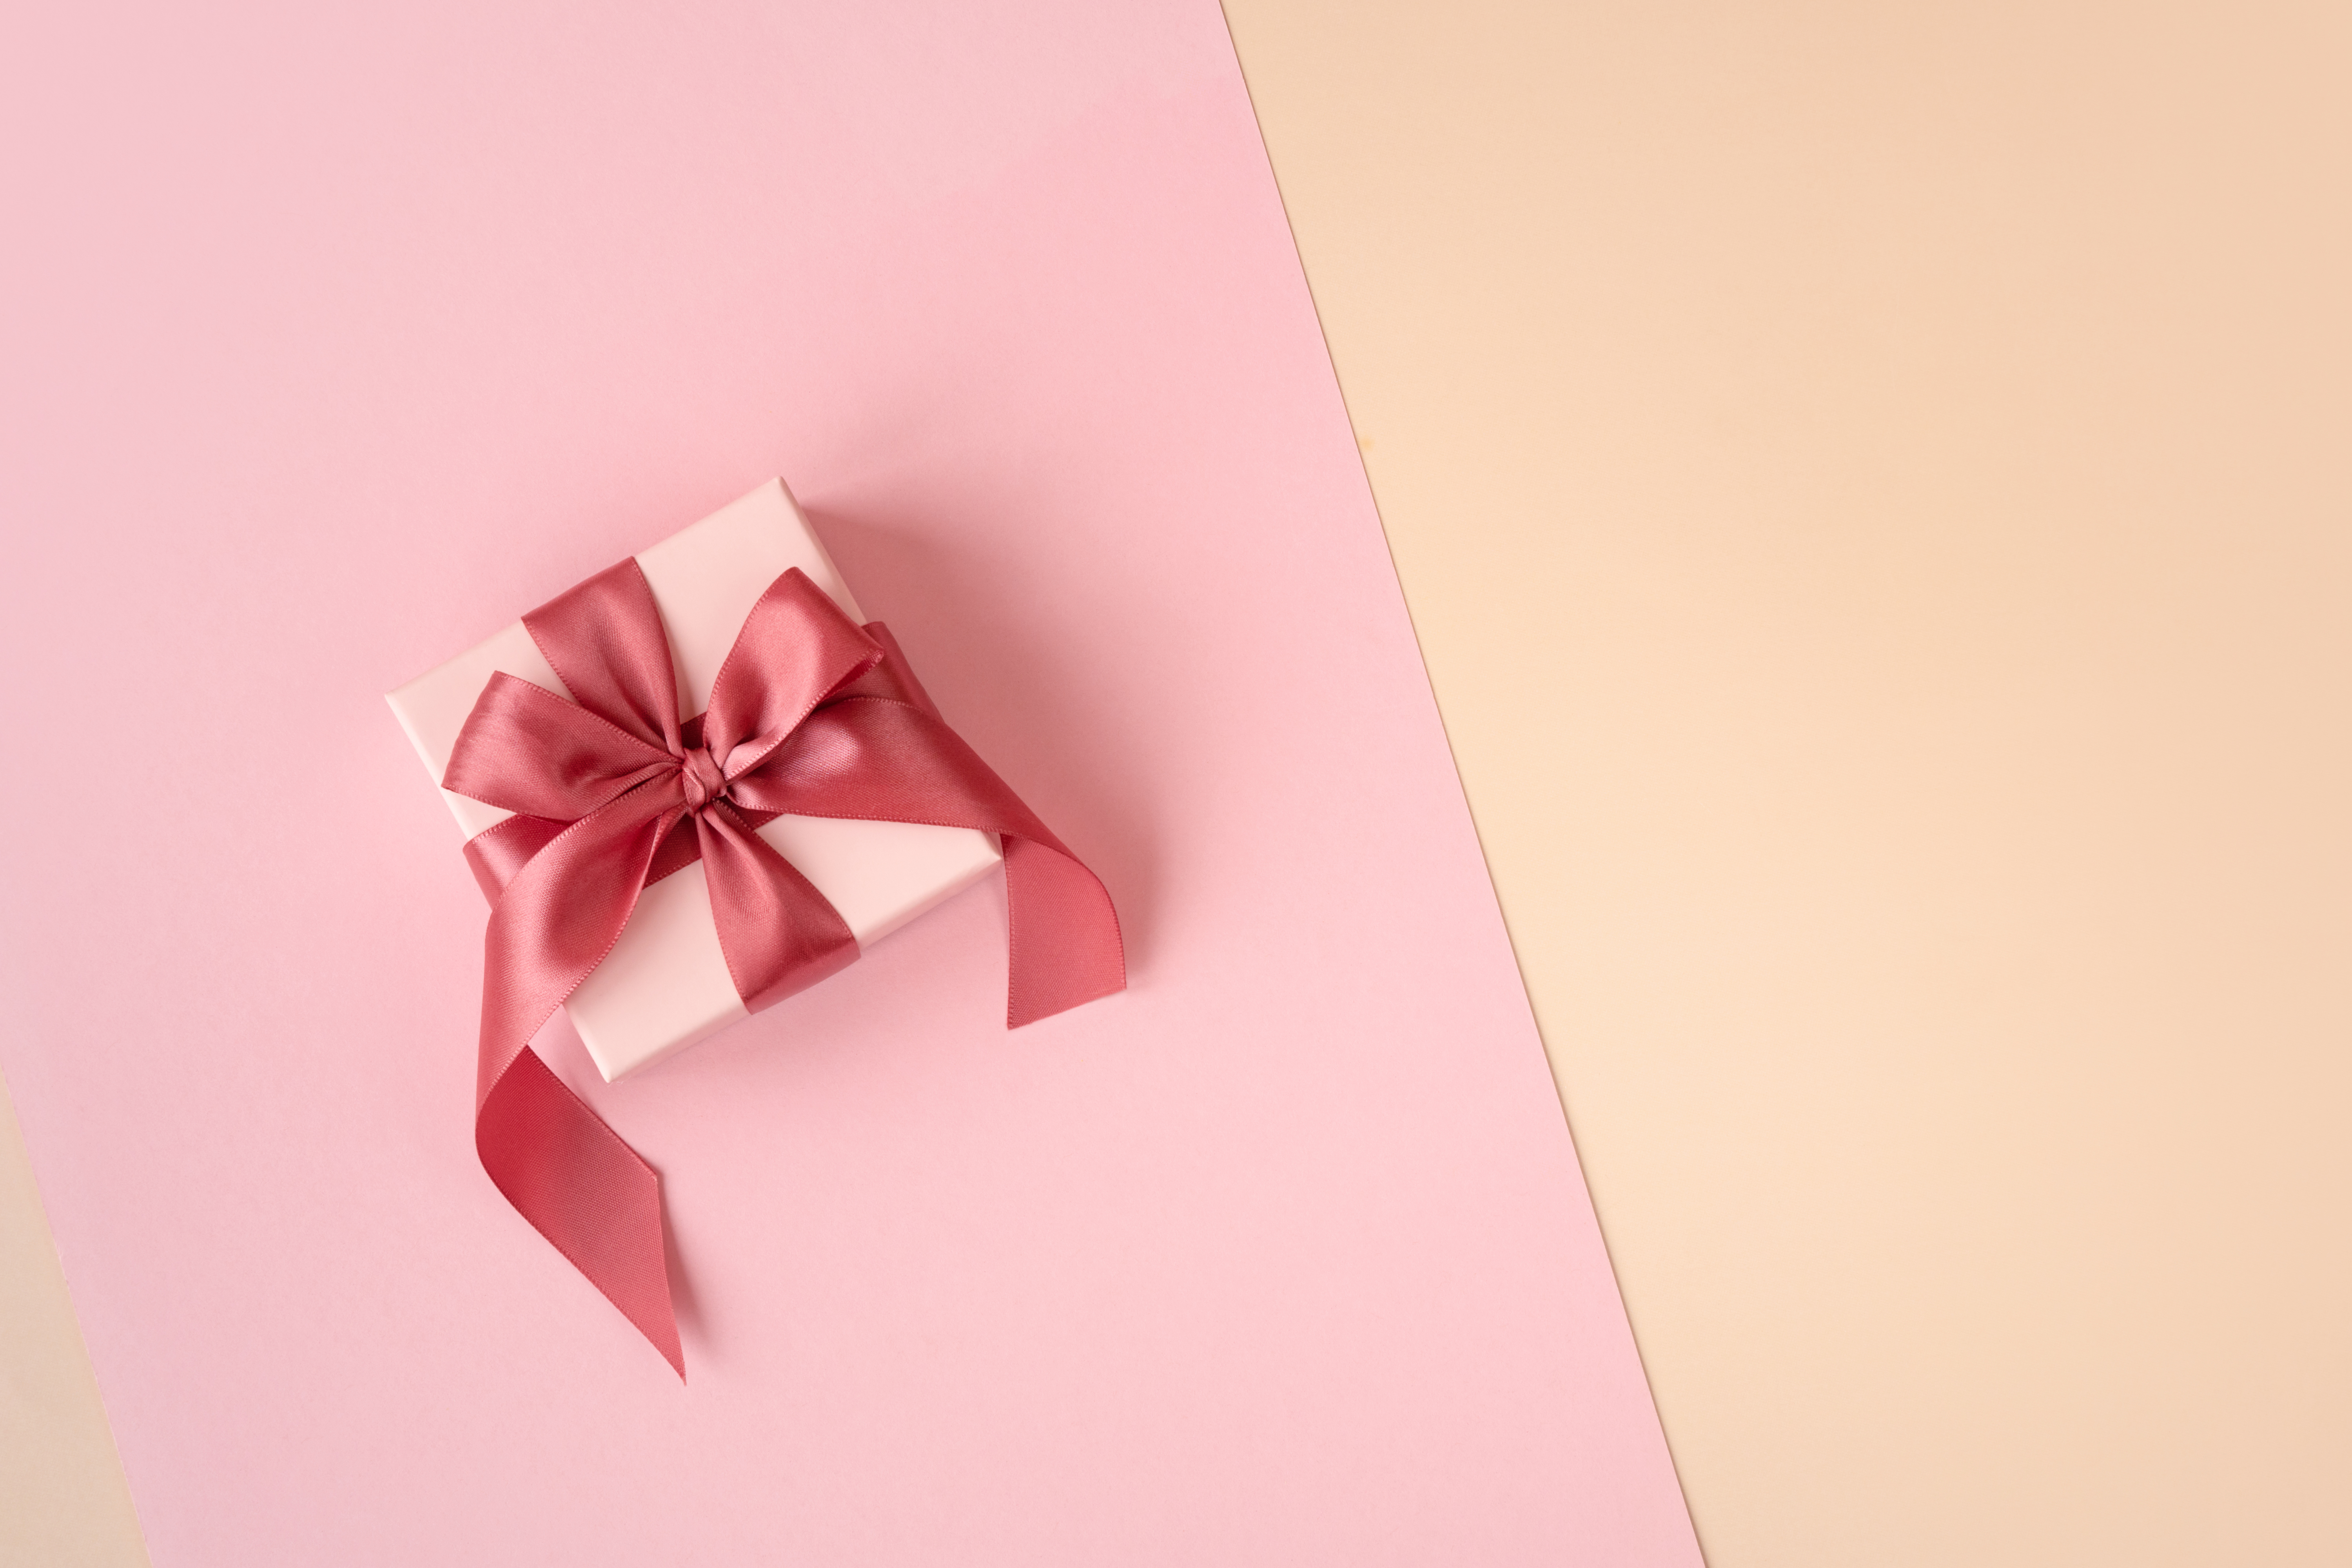 Top gift ideas for Mum. A pink gift box with red ribbon.